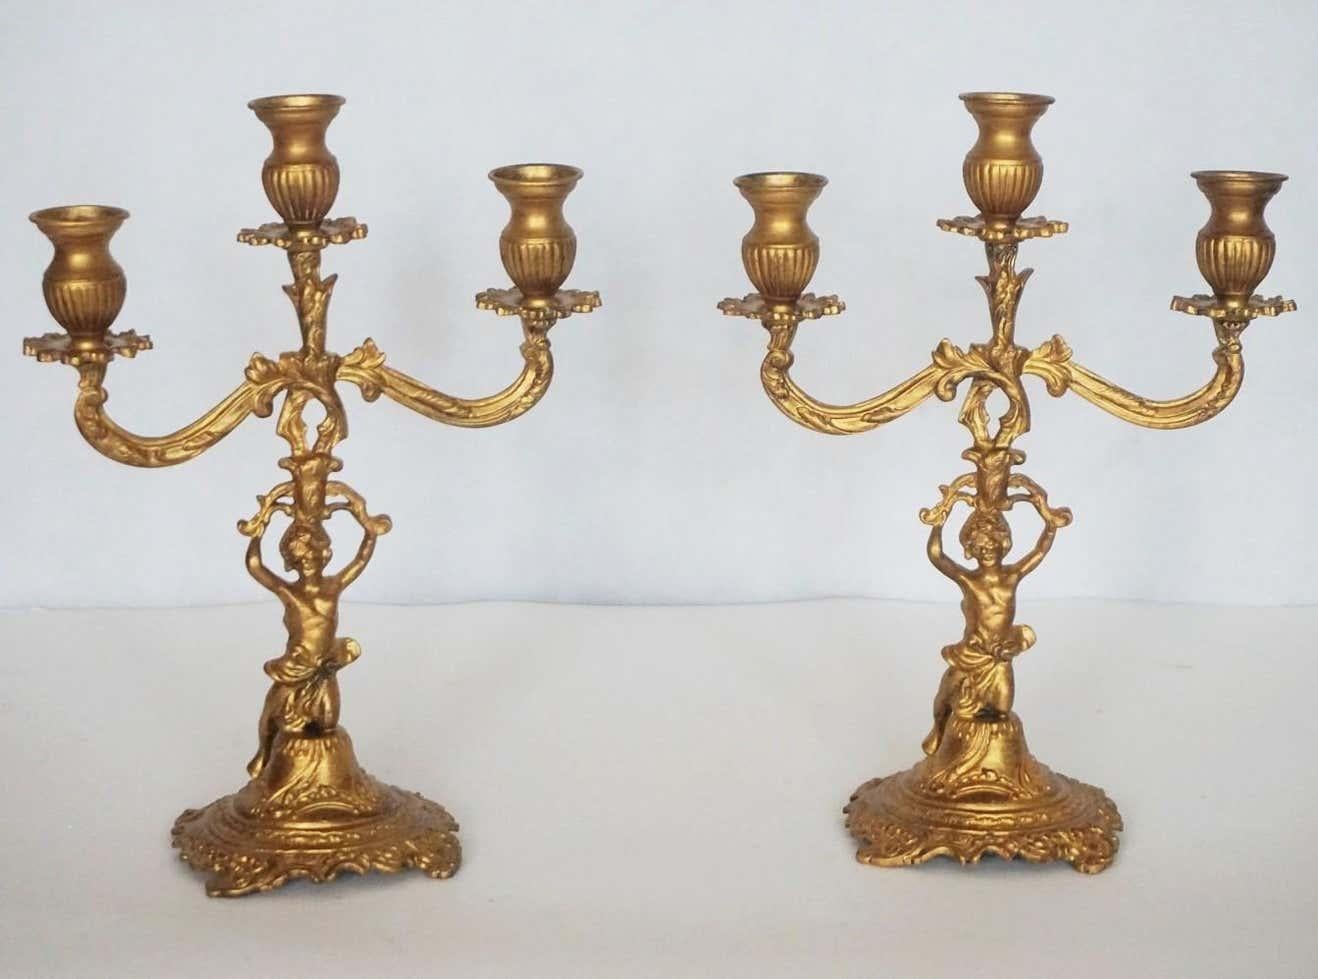 A pair of gilt bronze three-light candelabra with kneeling putto holding the candleholders raised on richly elaborate base, France, late 19th century.
Measures:
Height 12.50 in / 31.5 cm
Width 9.50 in / 24 cm.